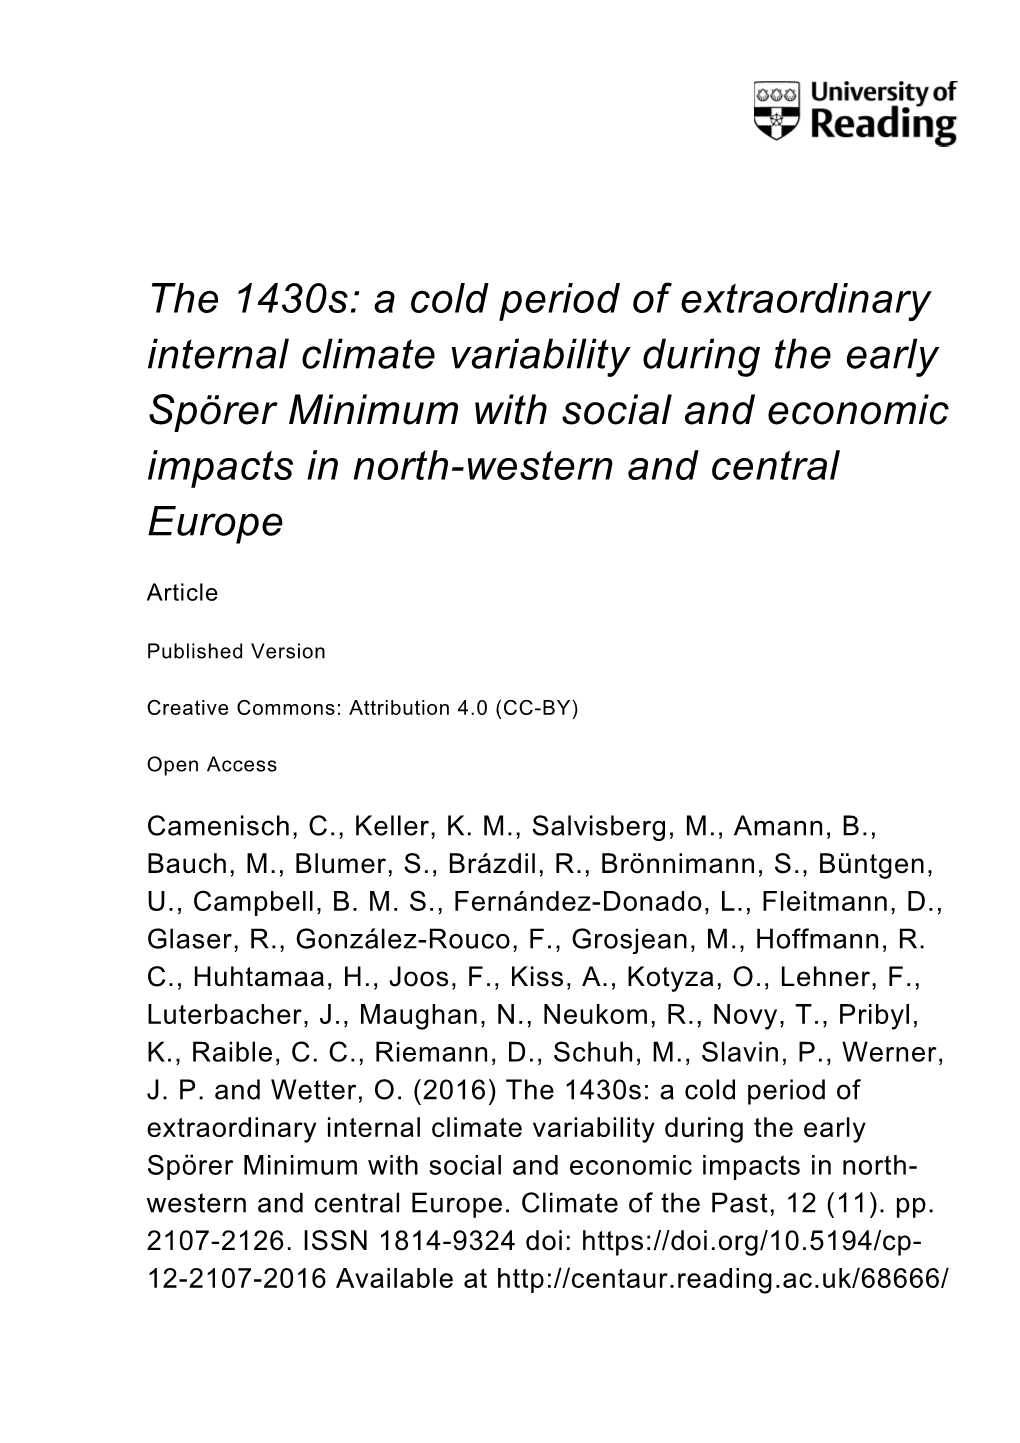 The 1430S: a Cold Period of Extraordinary Internal Climate